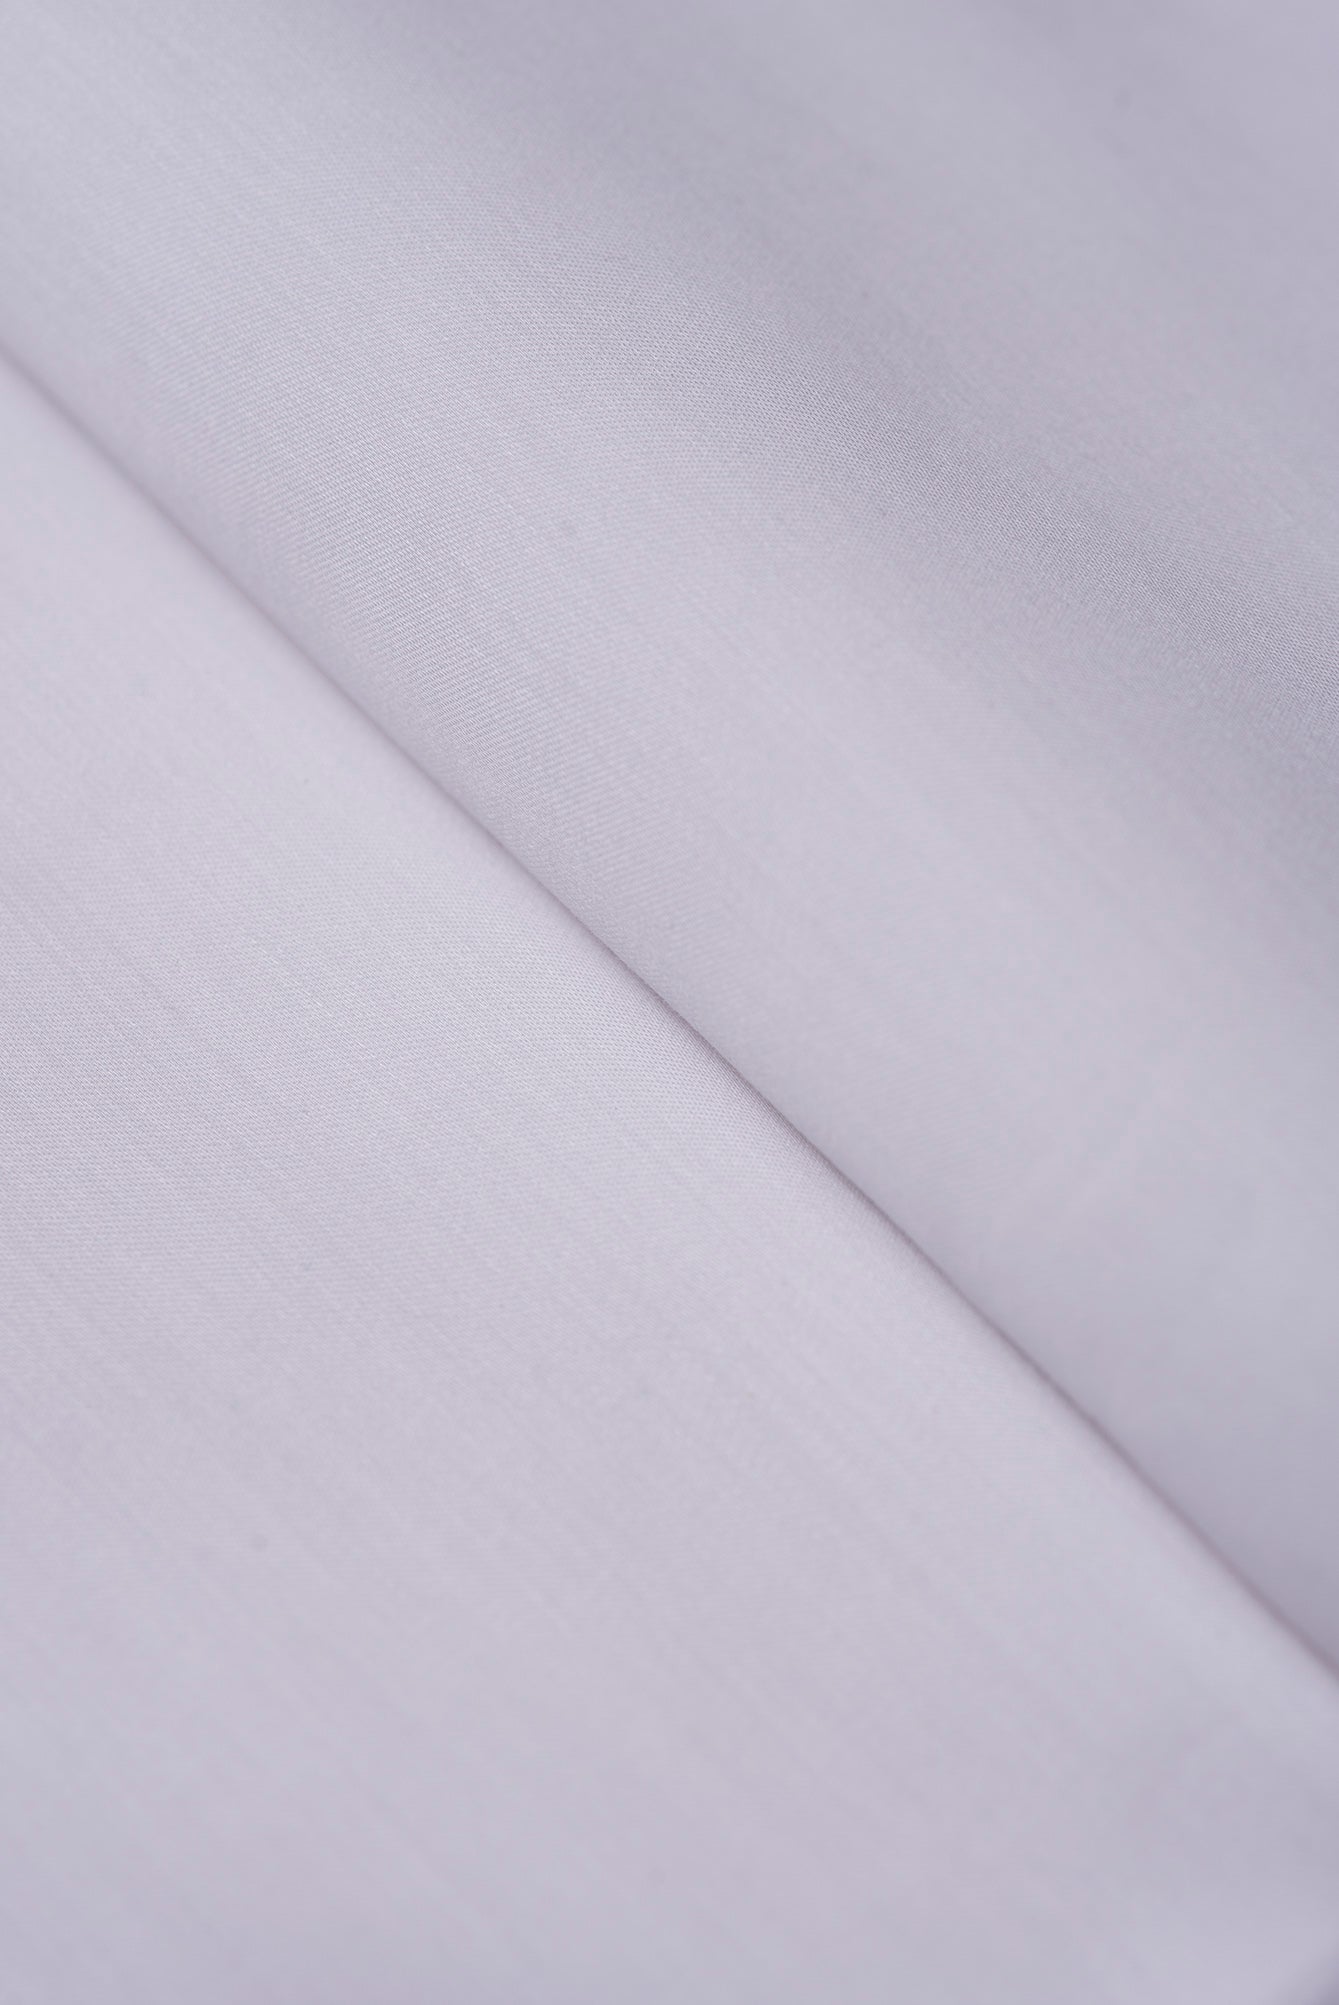 COTTON FABRIC OFF WHITE GLF-IMPERIAL